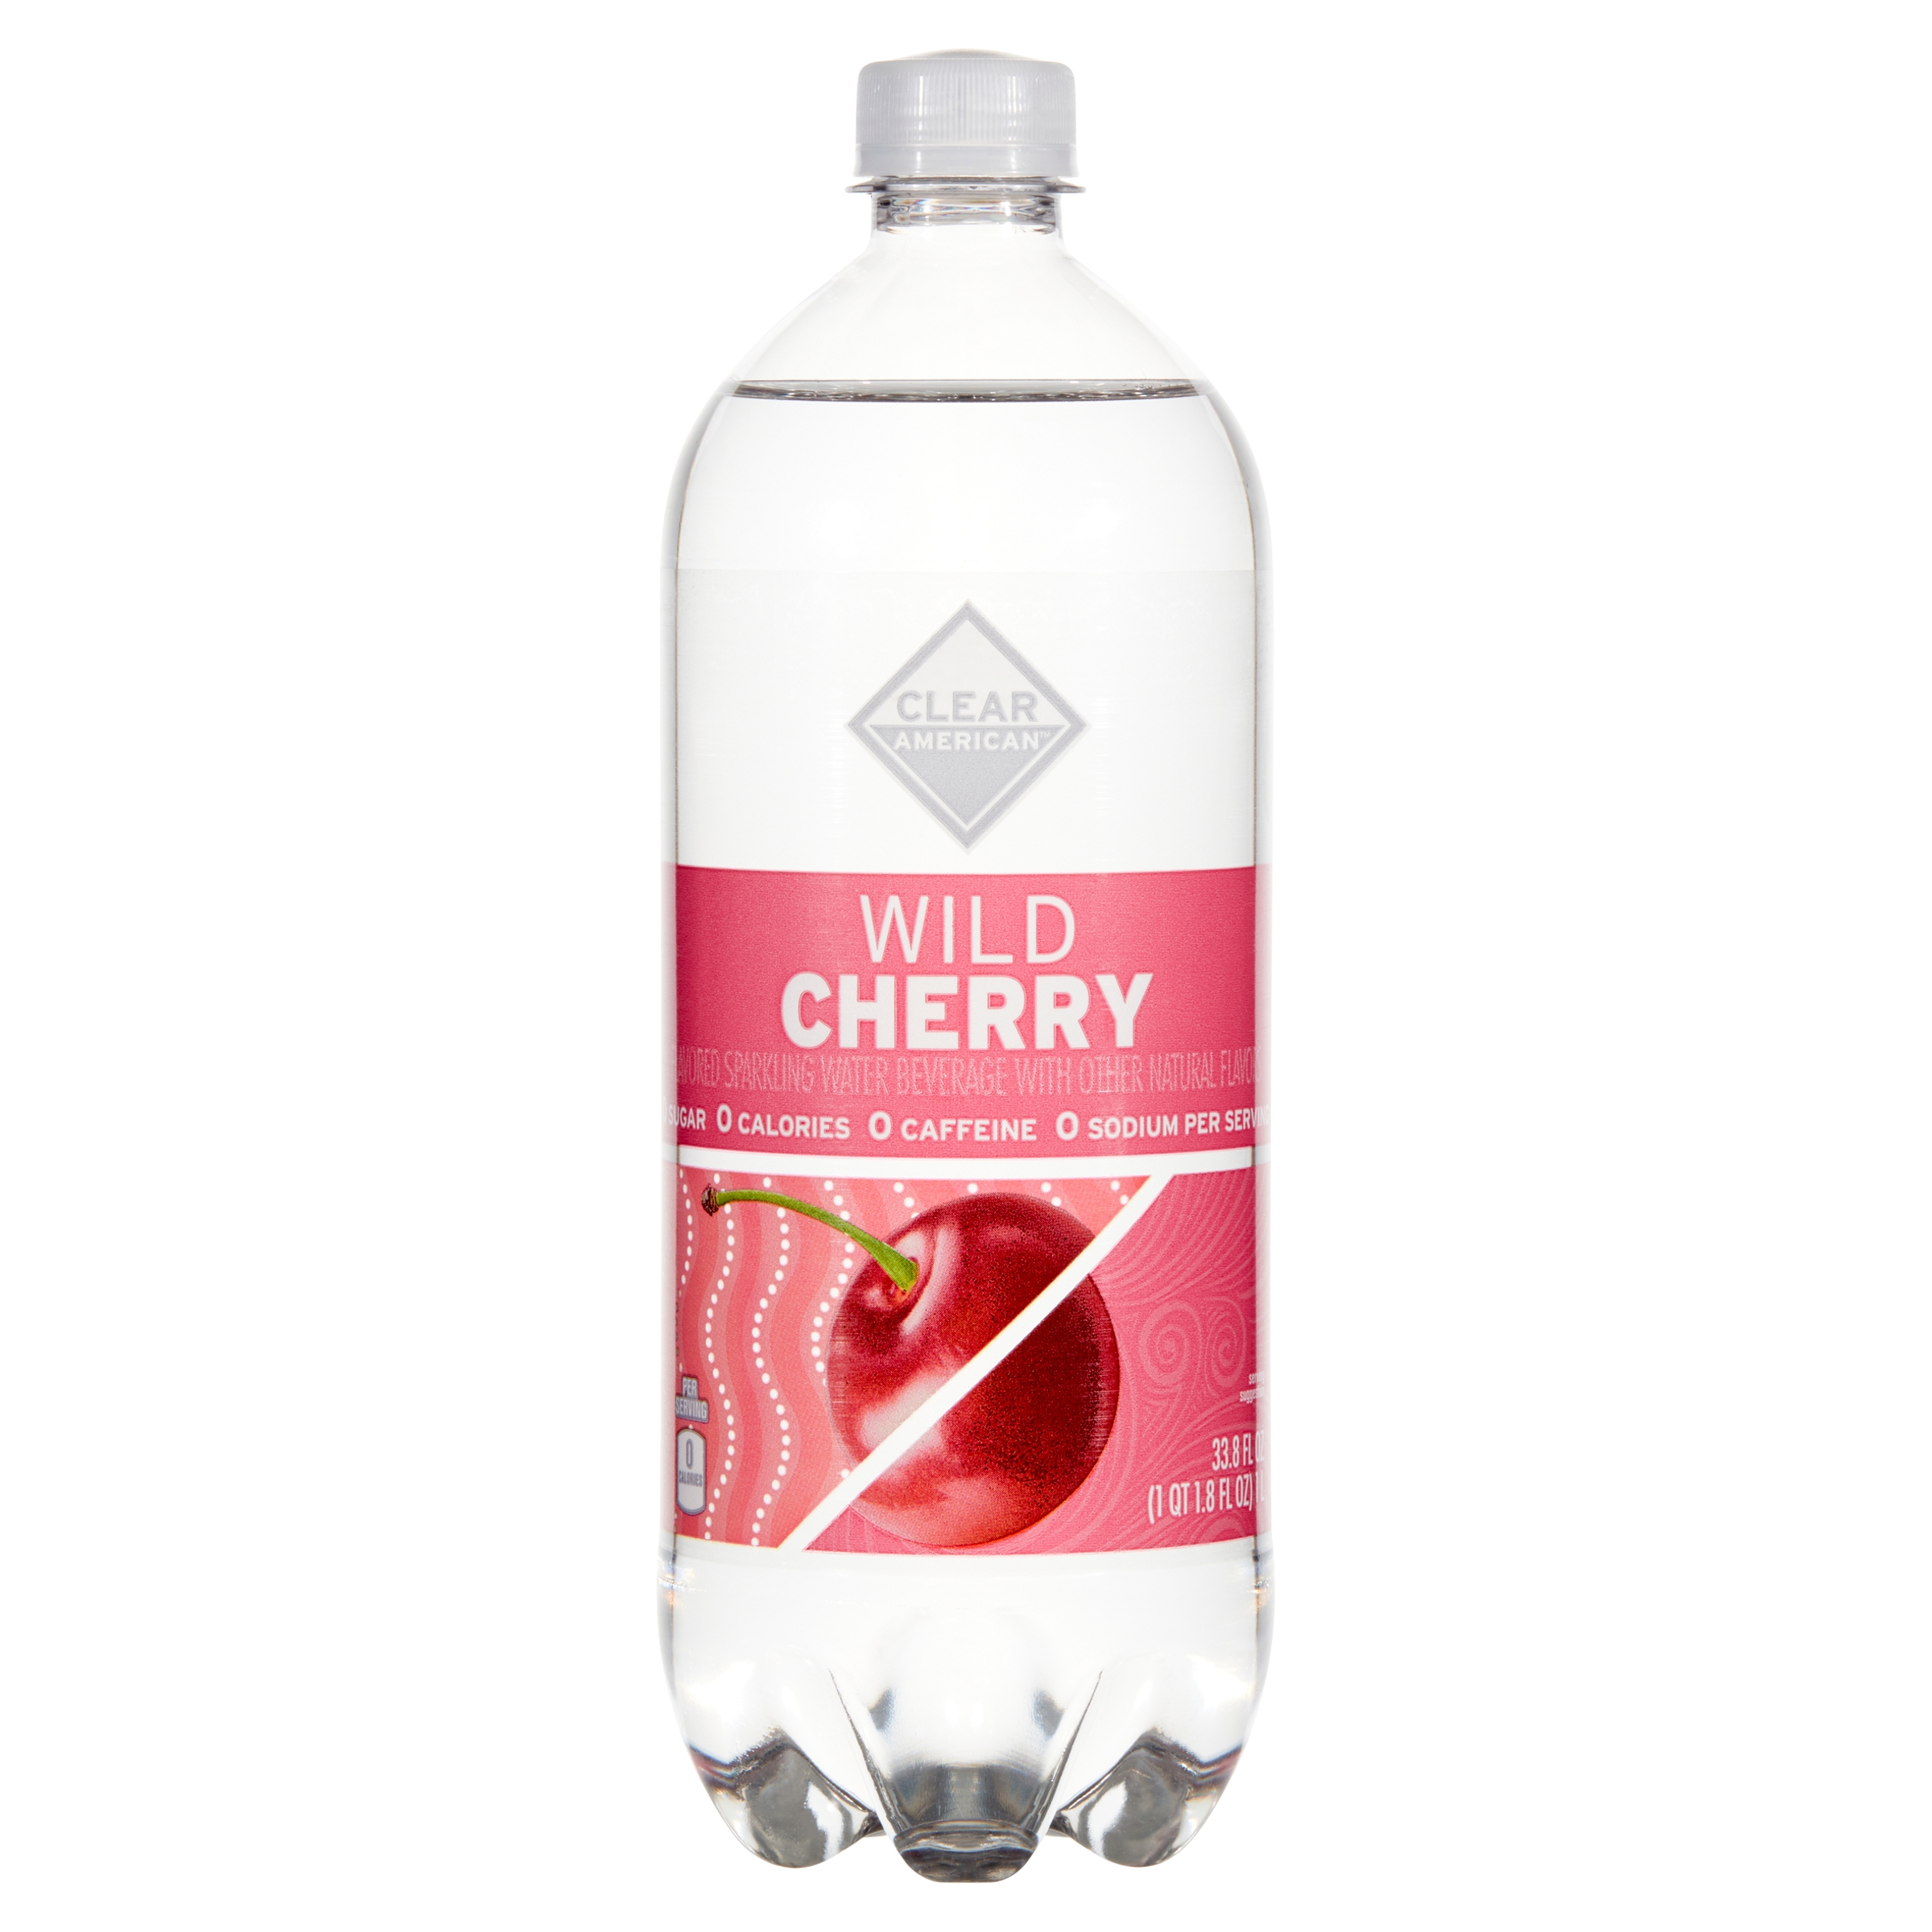 Clear American Sparkling Water, Wild Cherry, 33.8 fl oz - image 1 of 7